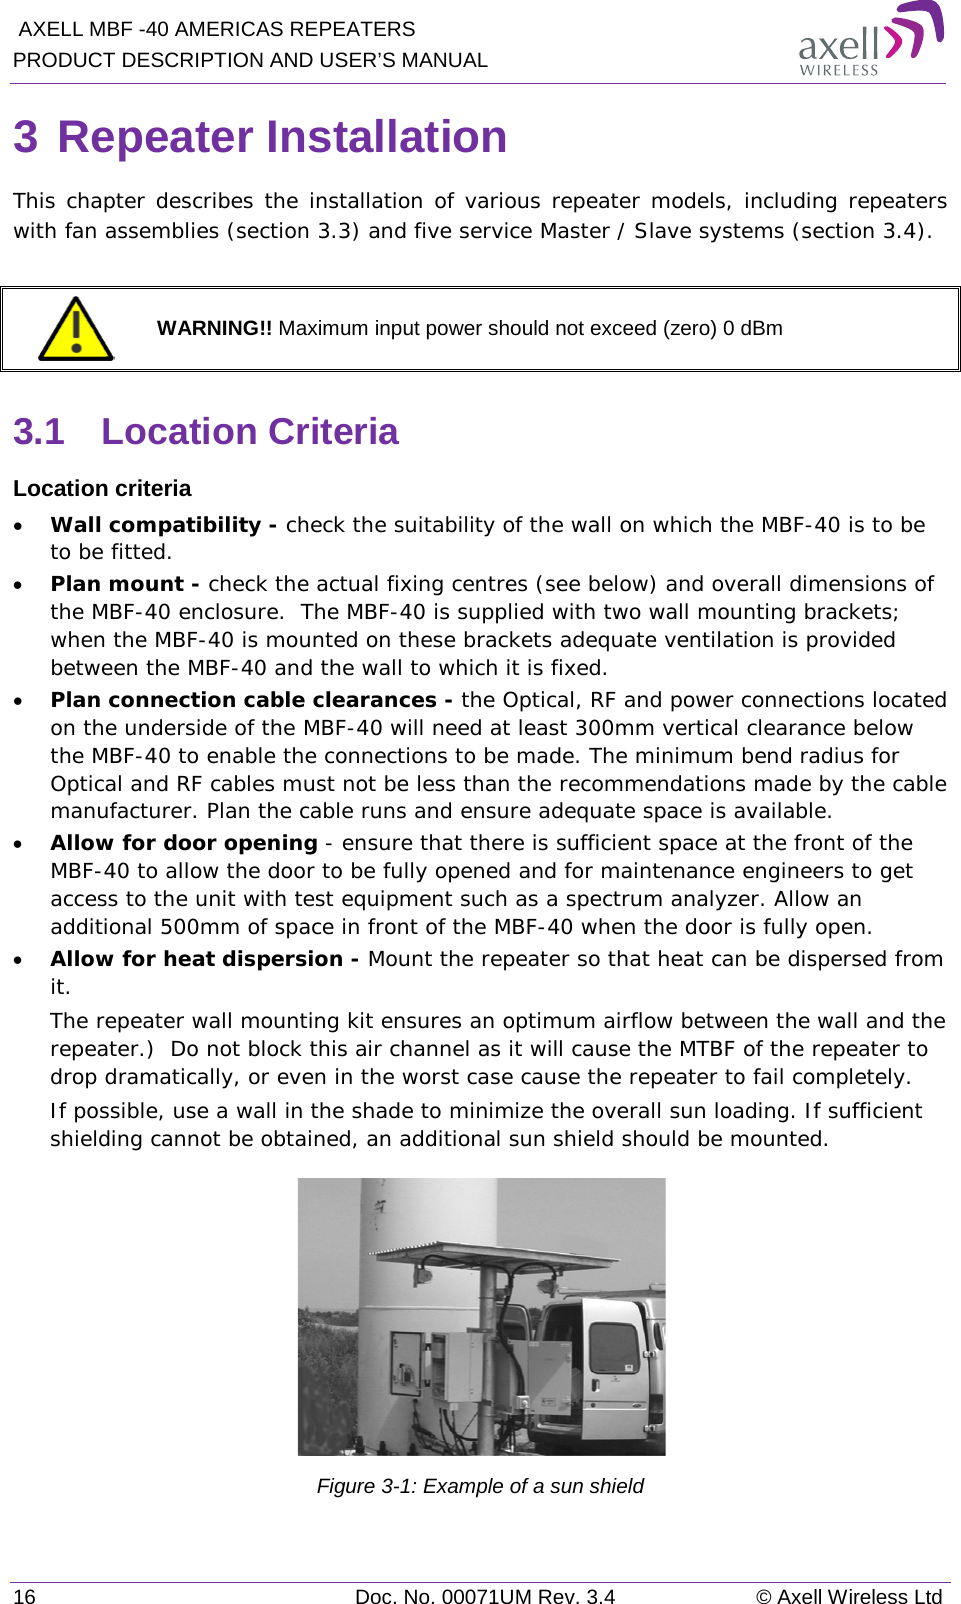  AXELL MBF -40 AMERICAS REPEATERS PRODUCT DESCRIPTION AND USER’S MANUAL 16 Doc. No. 00071UM Rev. 3.4 © Axell Wireless Ltd 3 Repeater Installation This chapter describes the installation of various repeater models, including repeaters with fan assemblies (section  3.3) and five service Master / Slave systems (section  3.4).   WARNING!! Maximum input power should not exceed (zero) 0 dBm 3.1  Location Criteria Location criteria • Wall compatibility - check the suitability of the wall on which the MBF-40 is to be to be fitted.  • Plan mount - check the actual fixing centres (see below) and overall dimensions of the MBF-40 enclosure.  The MBF-40 is supplied with two wall mounting brackets; when the MBF-40 is mounted on these brackets adequate ventilation is provided between the MBF-40 and the wall to which it is fixed. • Plan connection cable clearances - the Optical, RF and power connections located on the underside of the MBF-40 will need at least 300mm vertical clearance below the MBF-40 to enable the connections to be made. The minimum bend radius for Optical and RF cables must not be less than the recommendations made by the cable manufacturer. Plan the cable runs and ensure adequate space is available. • Allow for door opening - ensure that there is sufficient space at the front of the MBF-40 to allow the door to be fully opened and for maintenance engineers to get access to the unit with test equipment such as a spectrum analyzer. Allow an additional 500mm of space in front of the MBF-40 when the door is fully open. • Allow for heat dispersion - Mount the repeater so that heat can be dispersed from it.   The repeater wall mounting kit ensures an optimum airflow between the wall and the repeater.)  Do not block this air channel as it will cause the MTBF of the repeater to drop dramatically, or even in the worst case cause the repeater to fail completely.  If possible, use a wall in the shade to minimize the overall sun loading. If sufficient shielding cannot be obtained, an additional sun shield should be mounted.   Figure  3-1: Example of a sun shield  